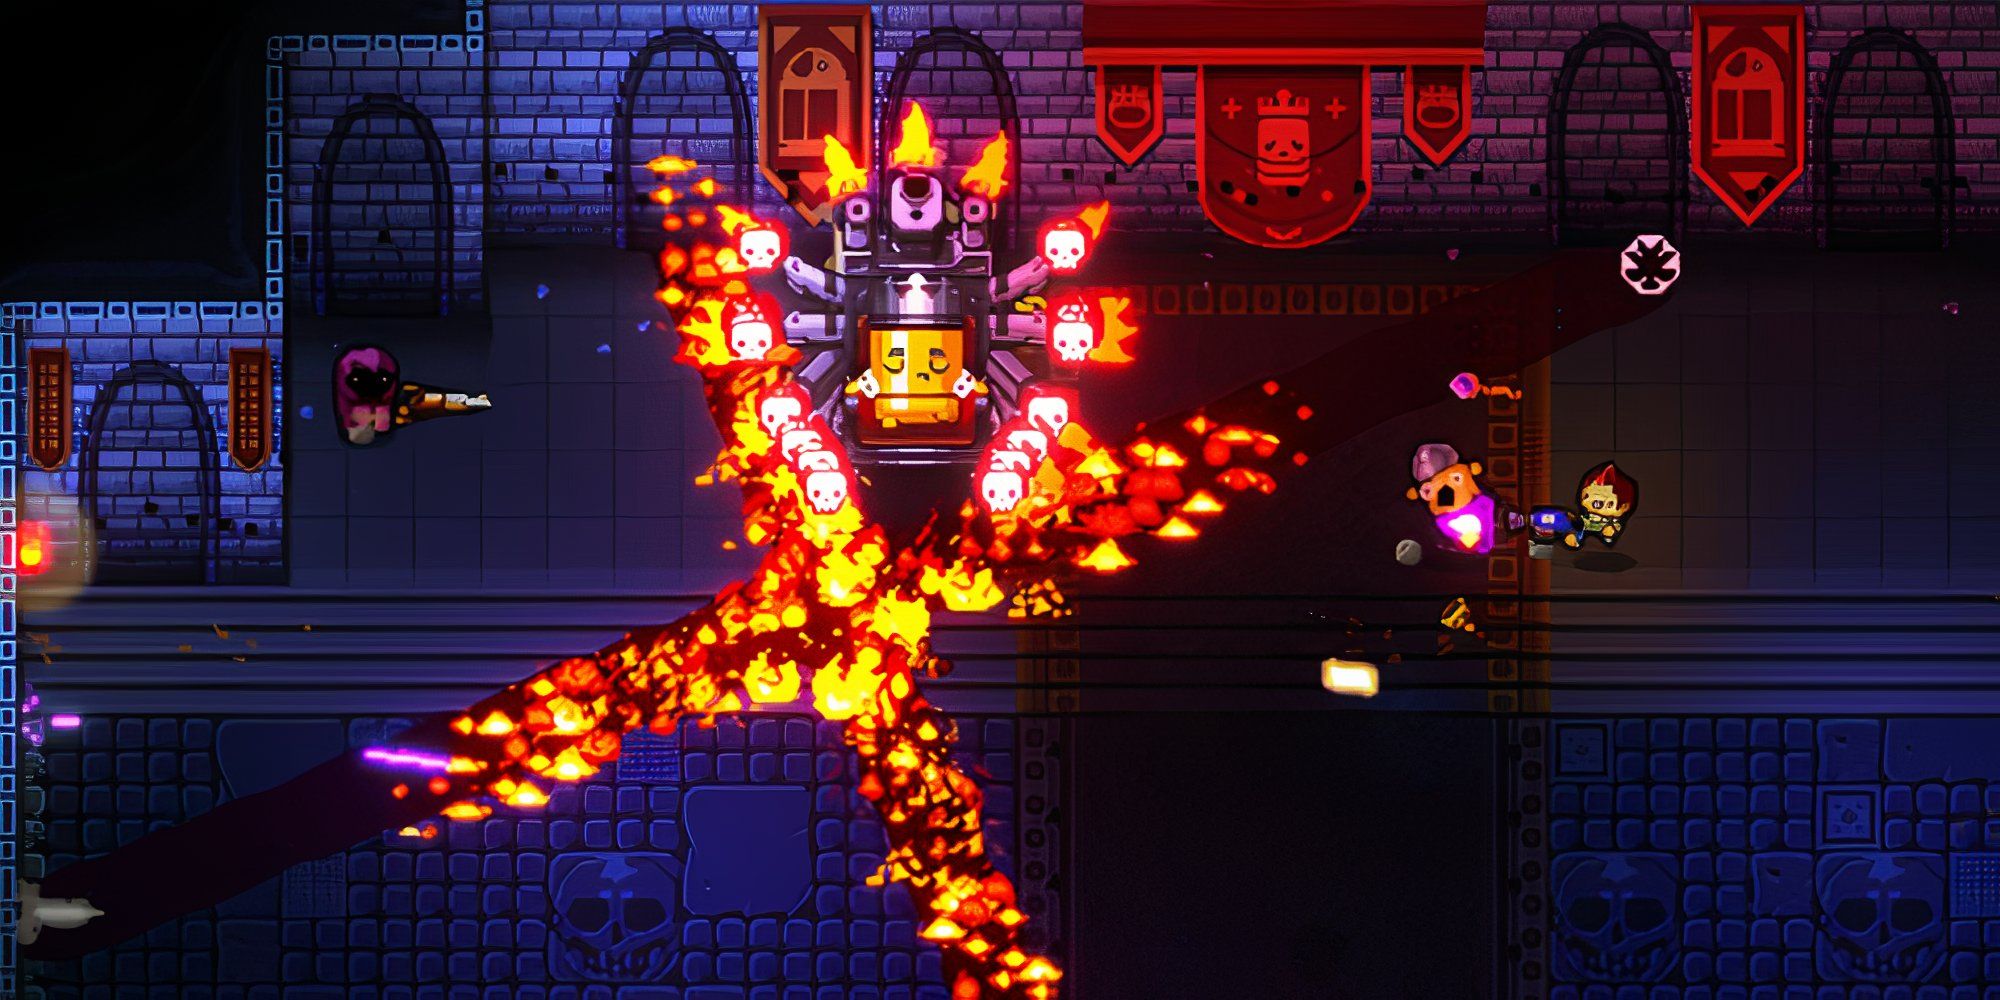 Fighting a boss in Enter The Gungeon